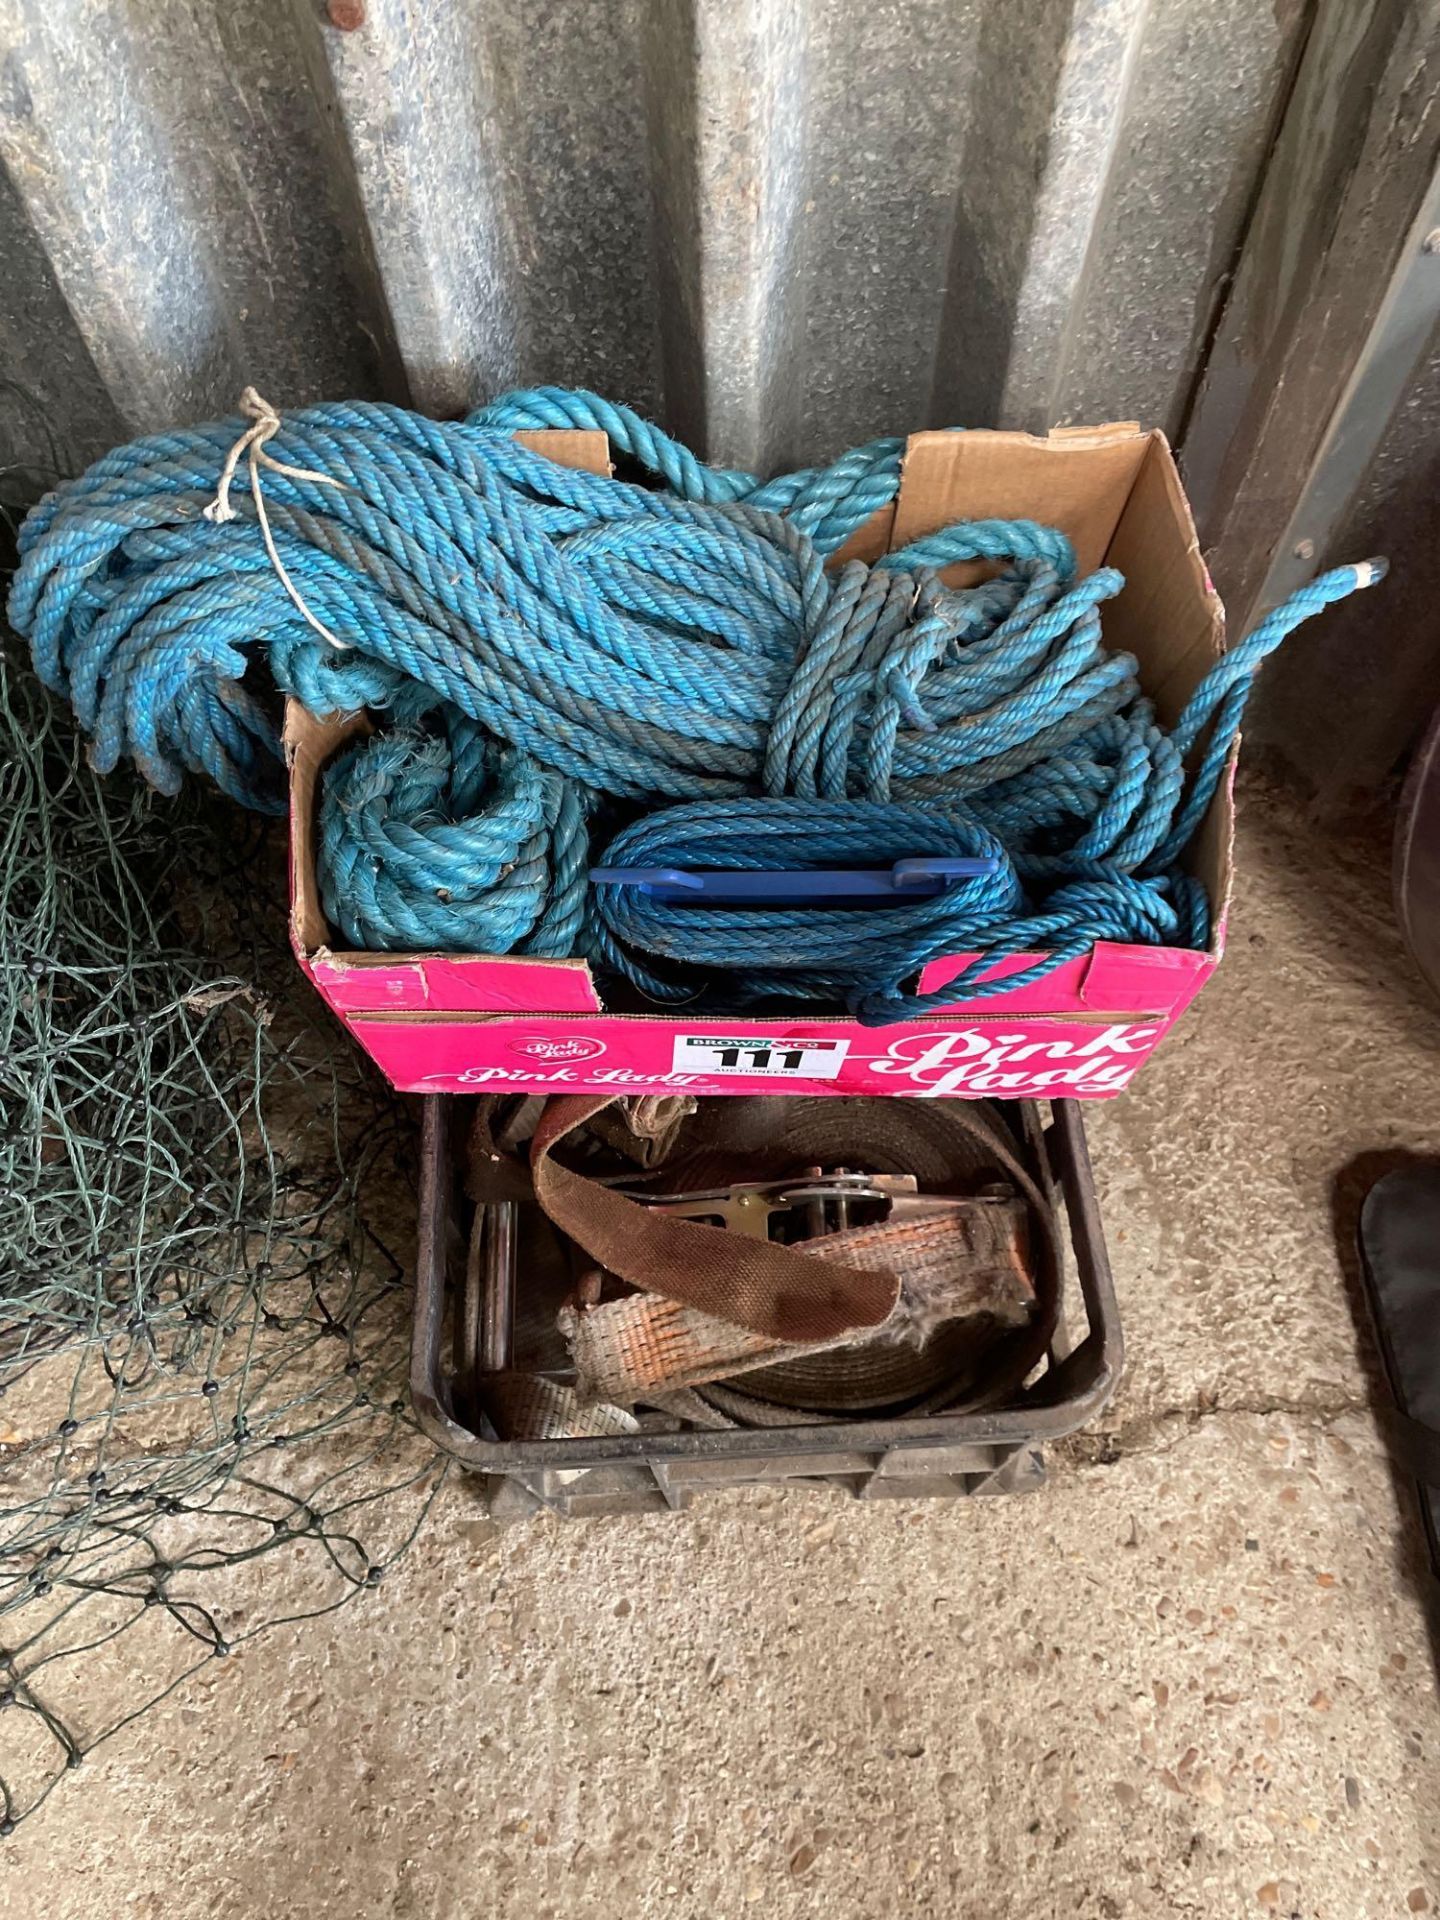 Quantity ratchet straps and rope